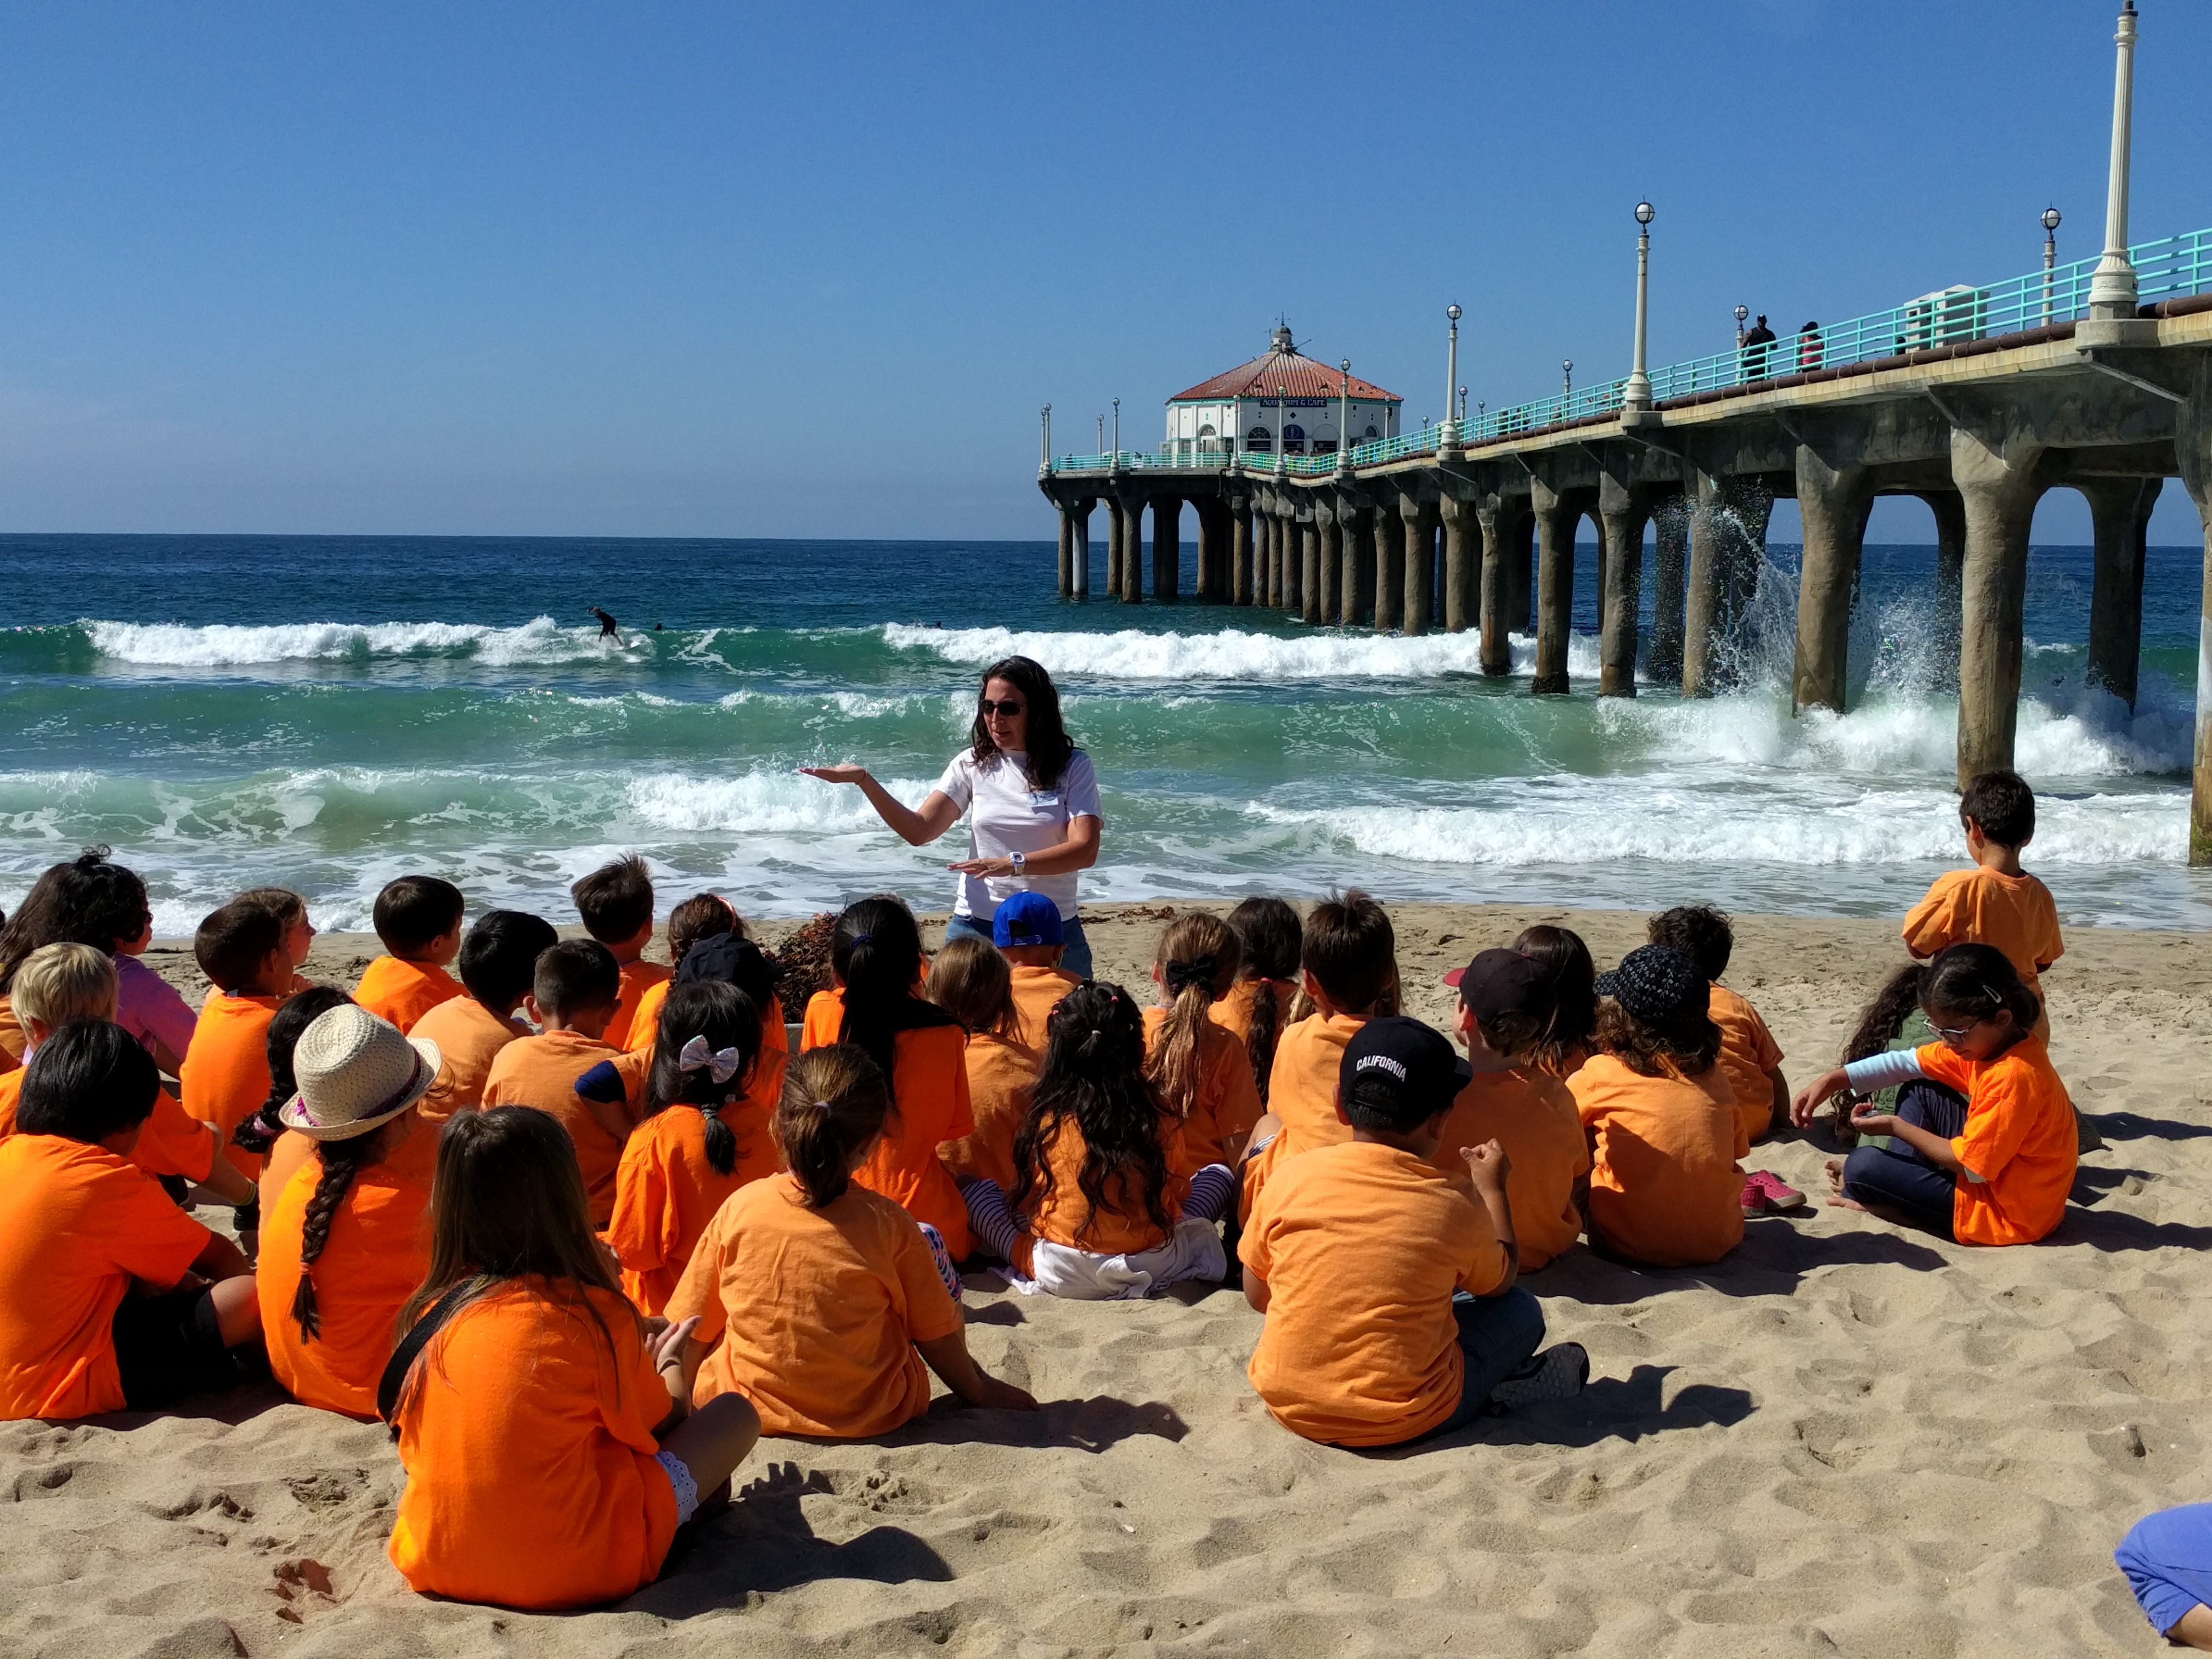 25% of these students had never been to the beach until this field trip!